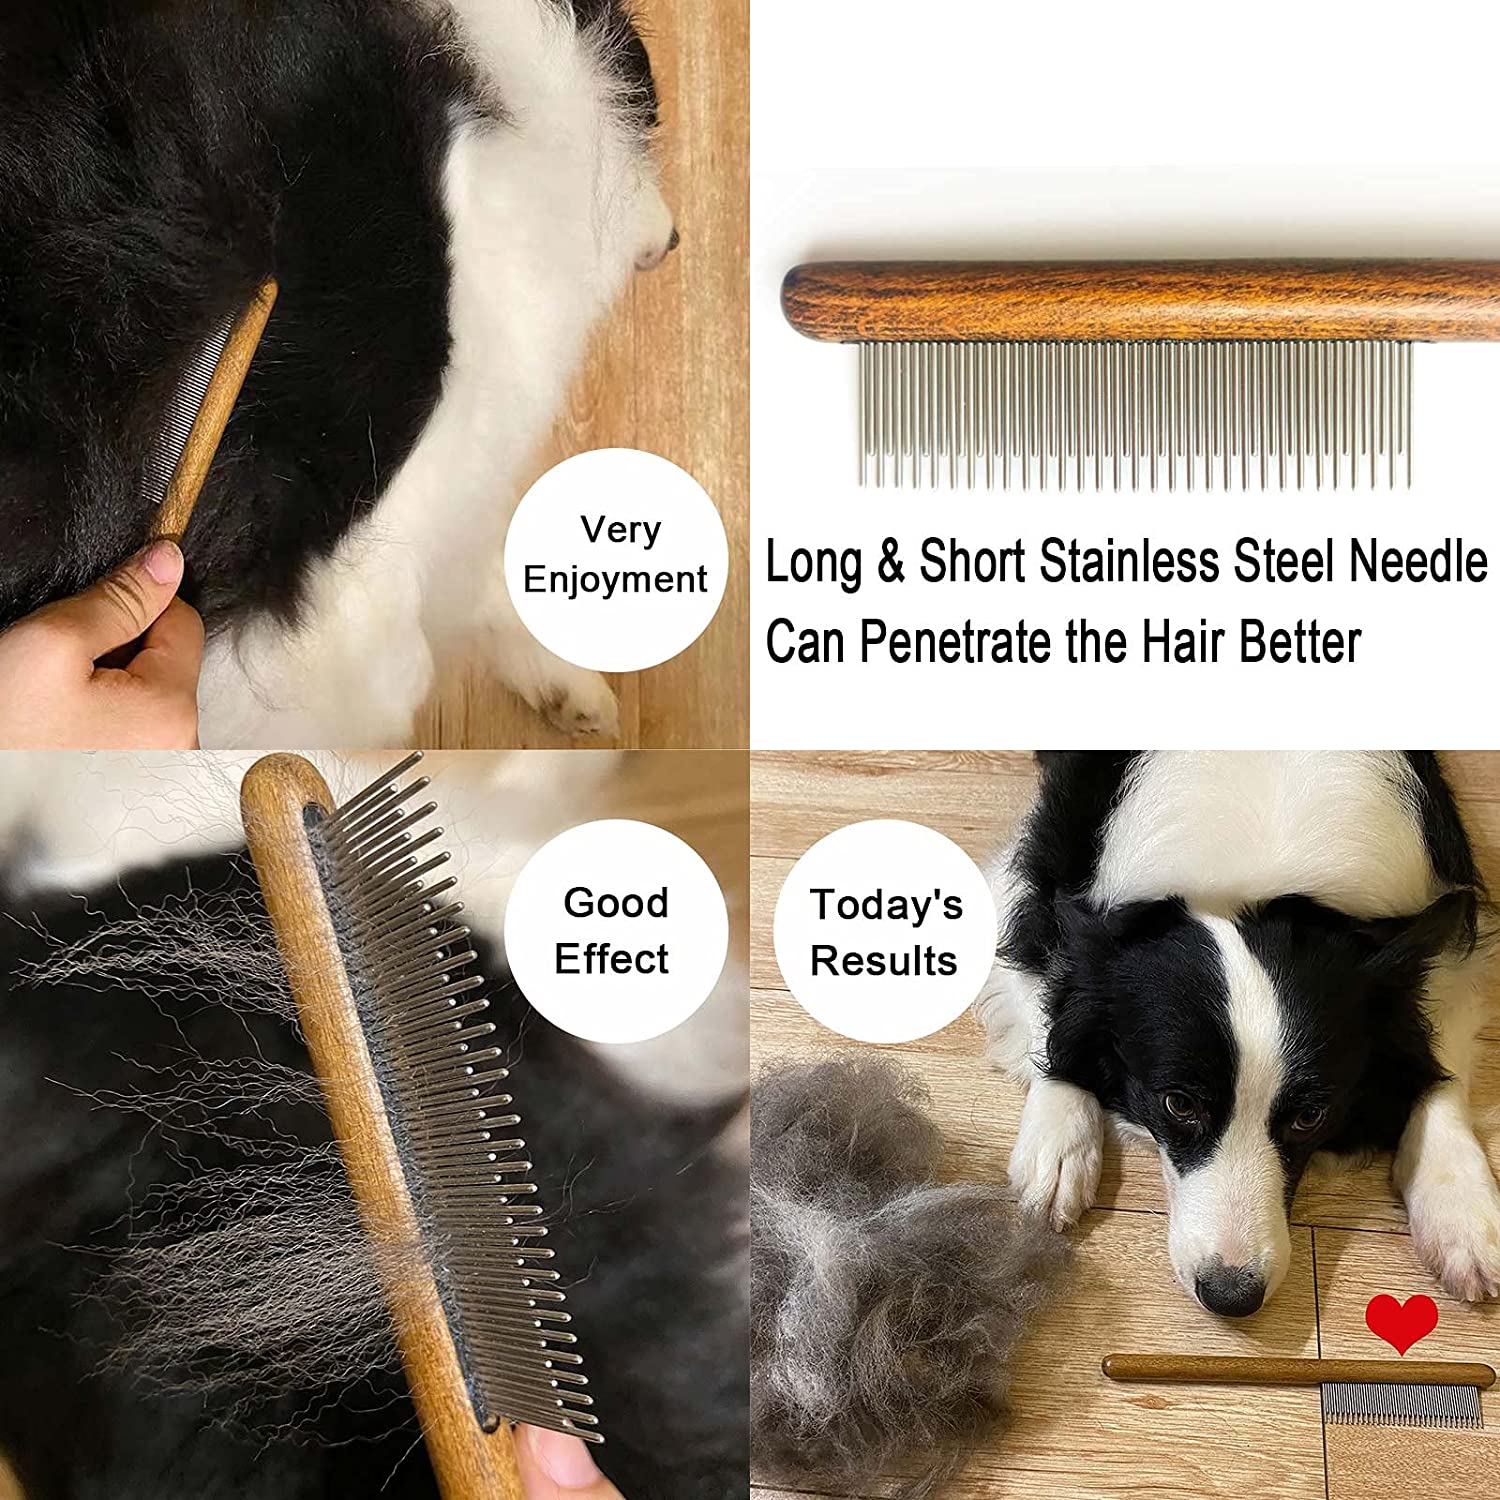 Durable Wooden Handle Cat Hair Remover Comb Pet Grooming Tools